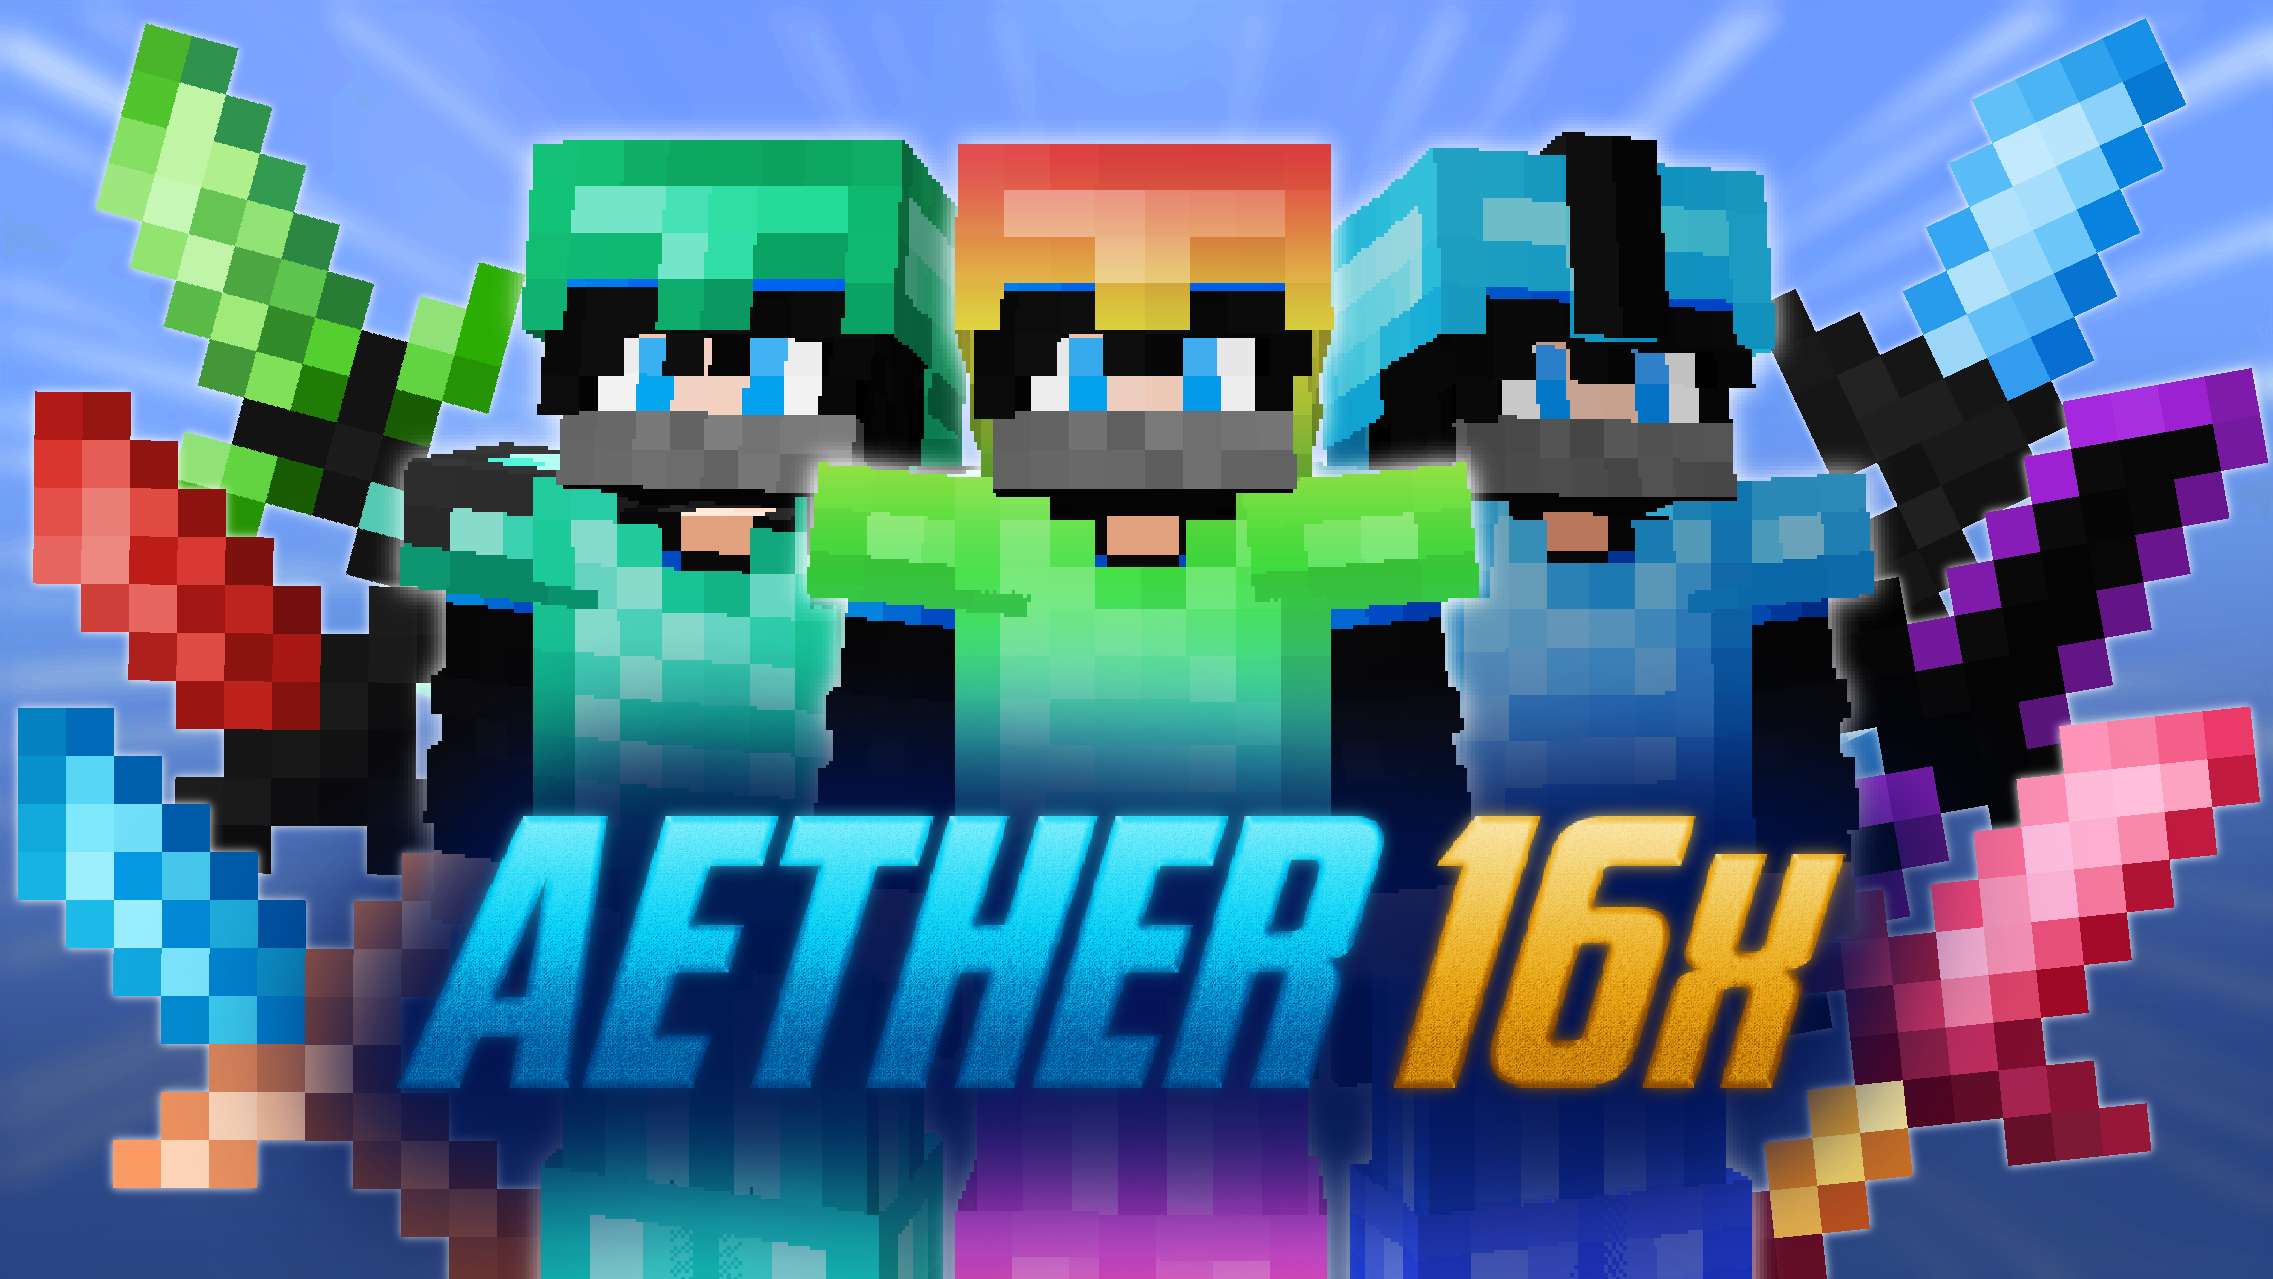 Aether  [Jona] 16x by Mqryo on PvPRP